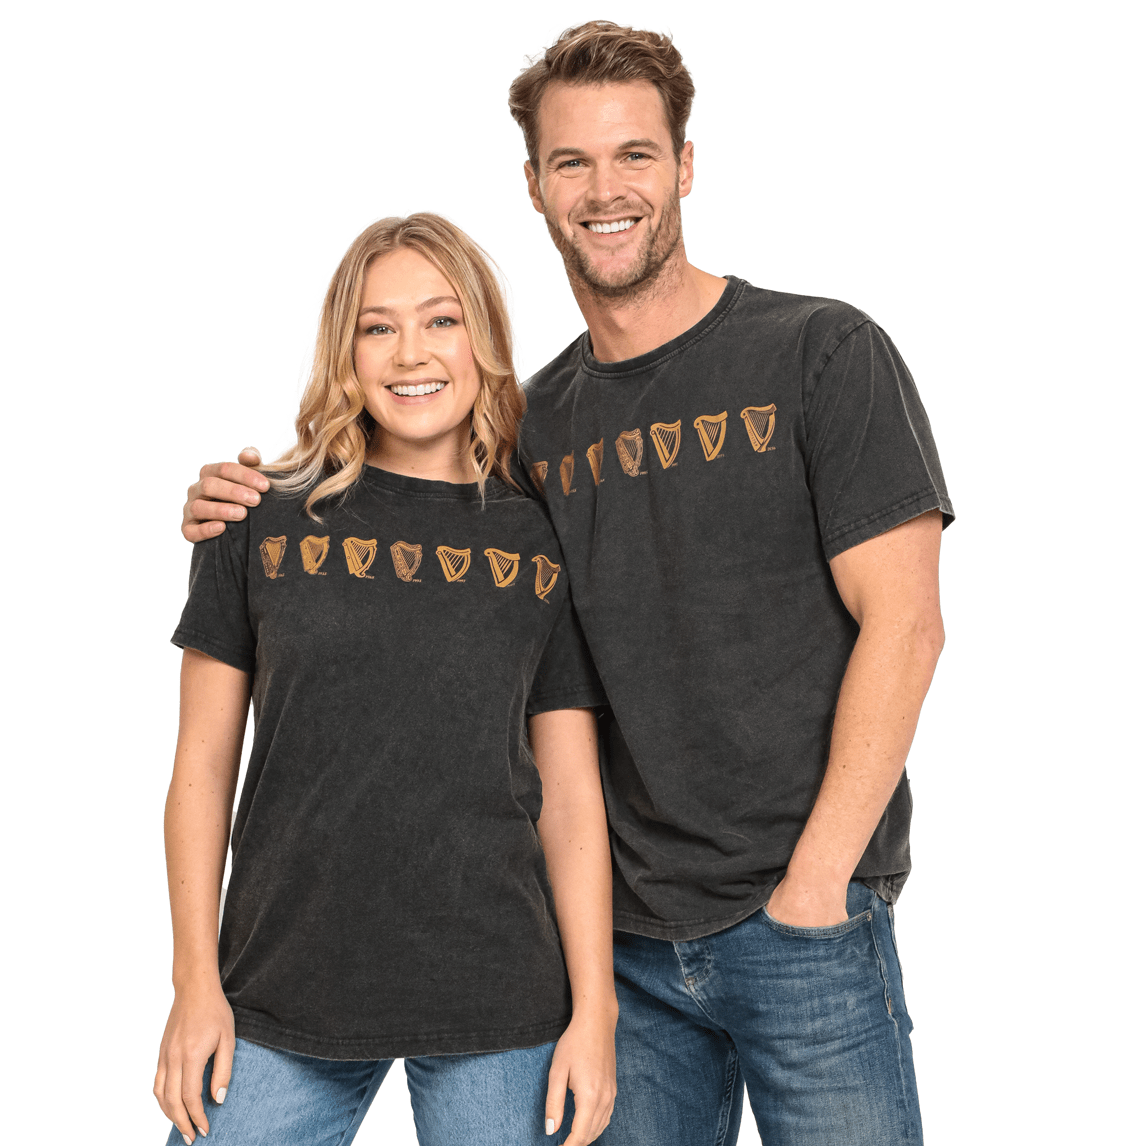 A man and woman standing next to each other wearing black Guinness Evolution Harp Tees.